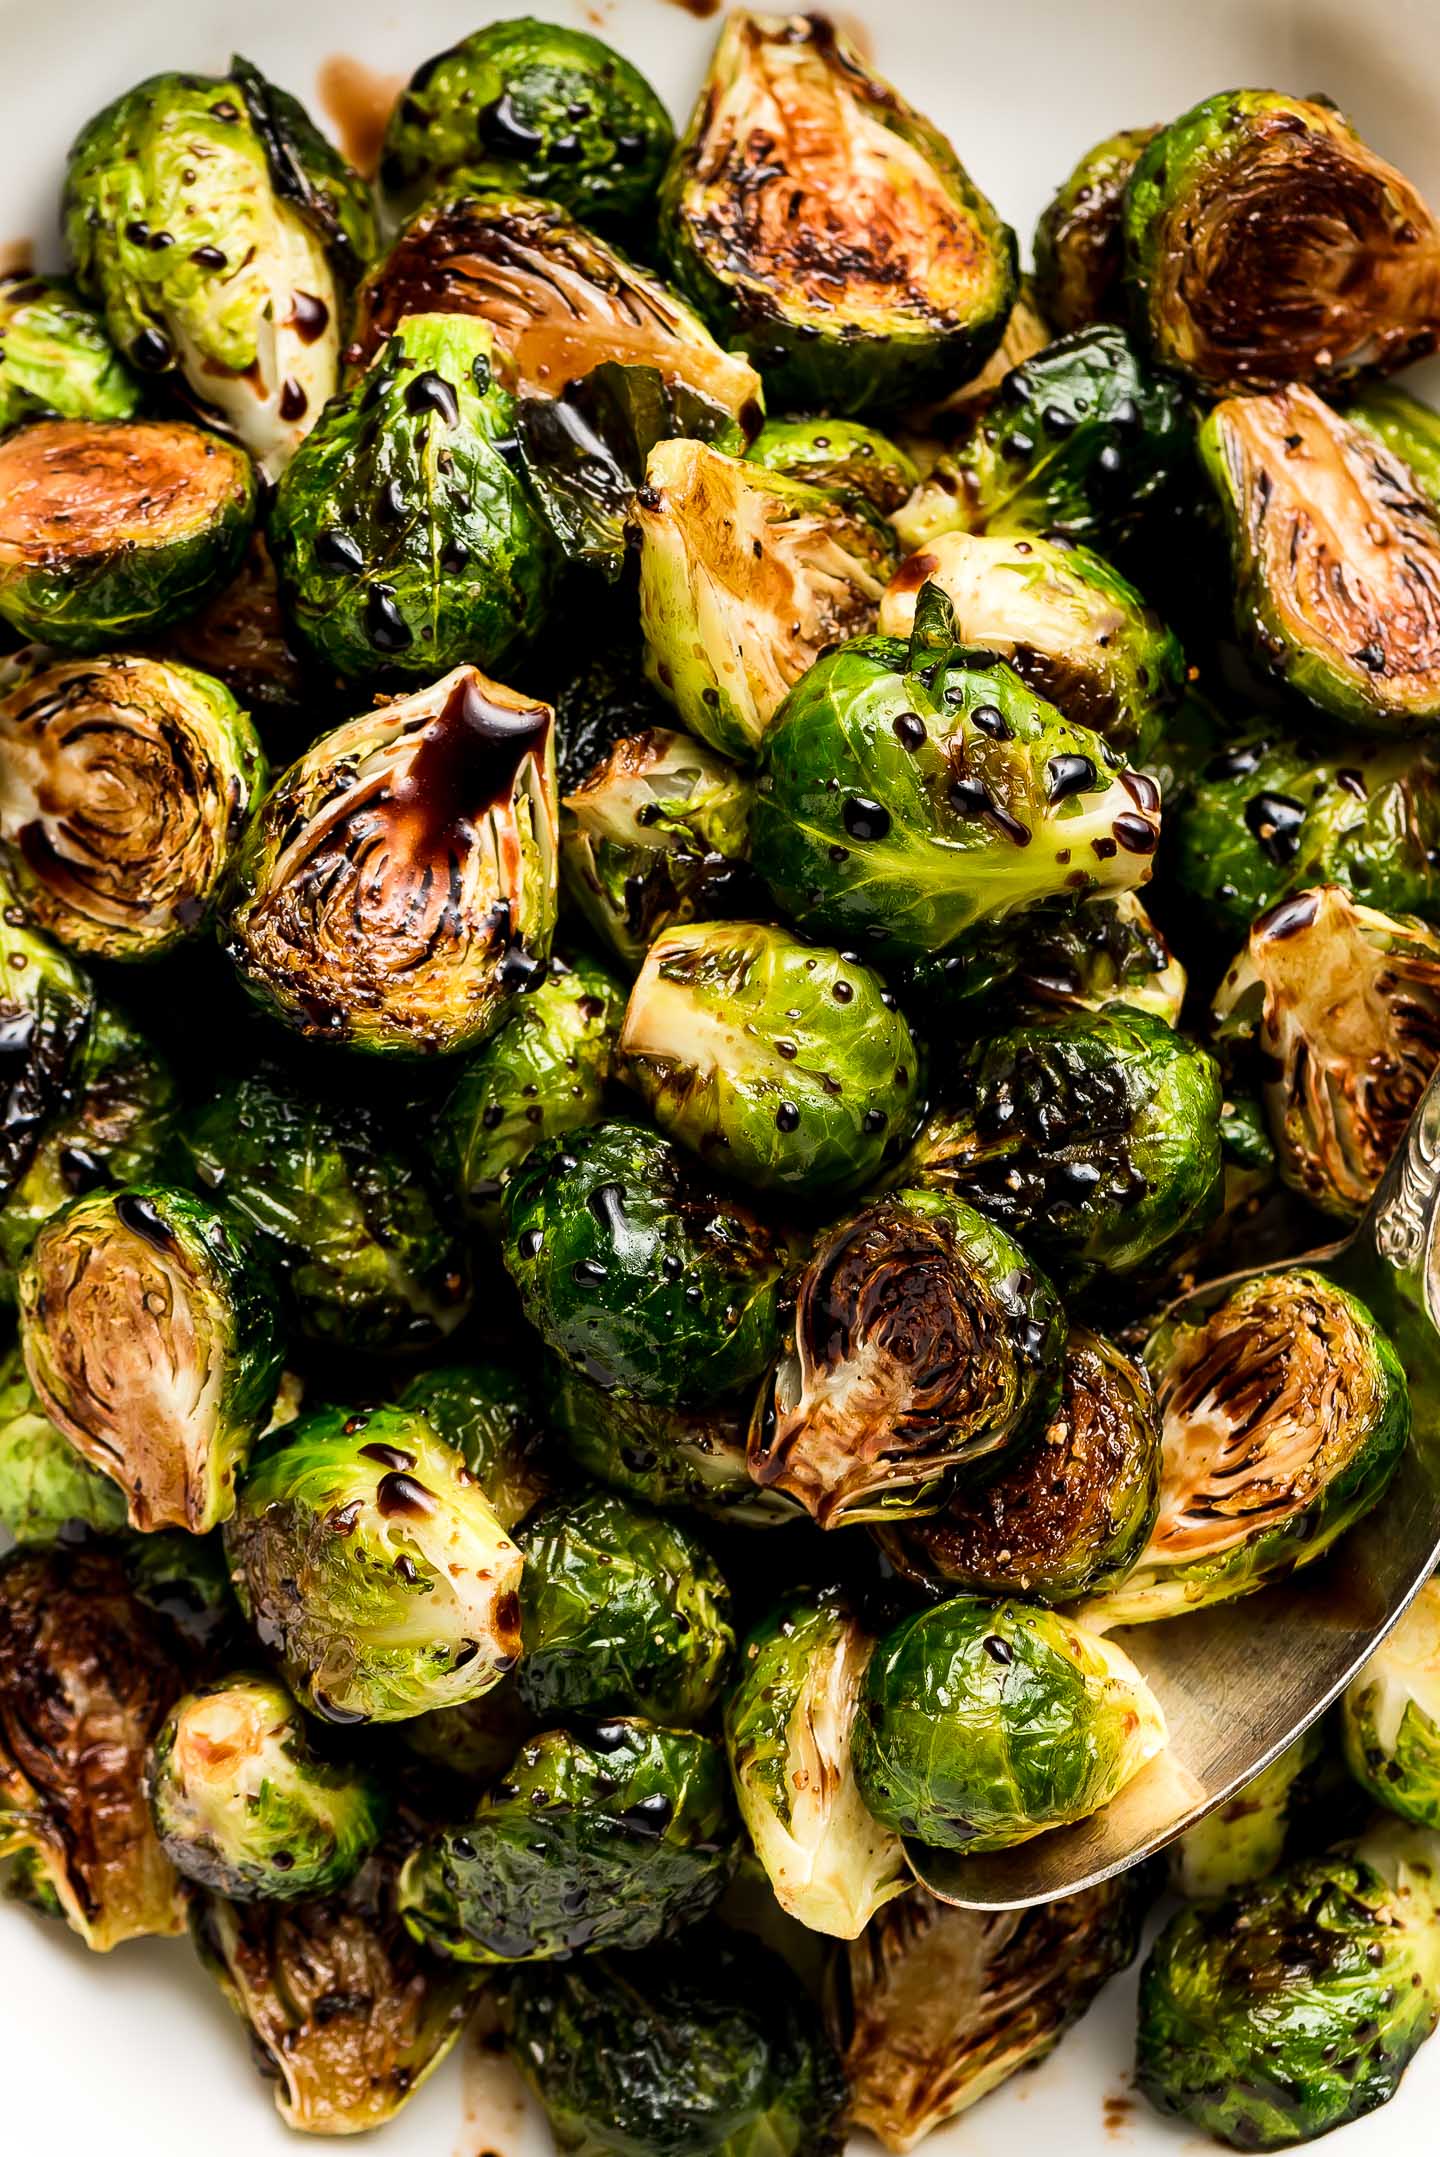 Roasted Brussels Sprouts with Balsamic Glaze - Garnish & Glaze